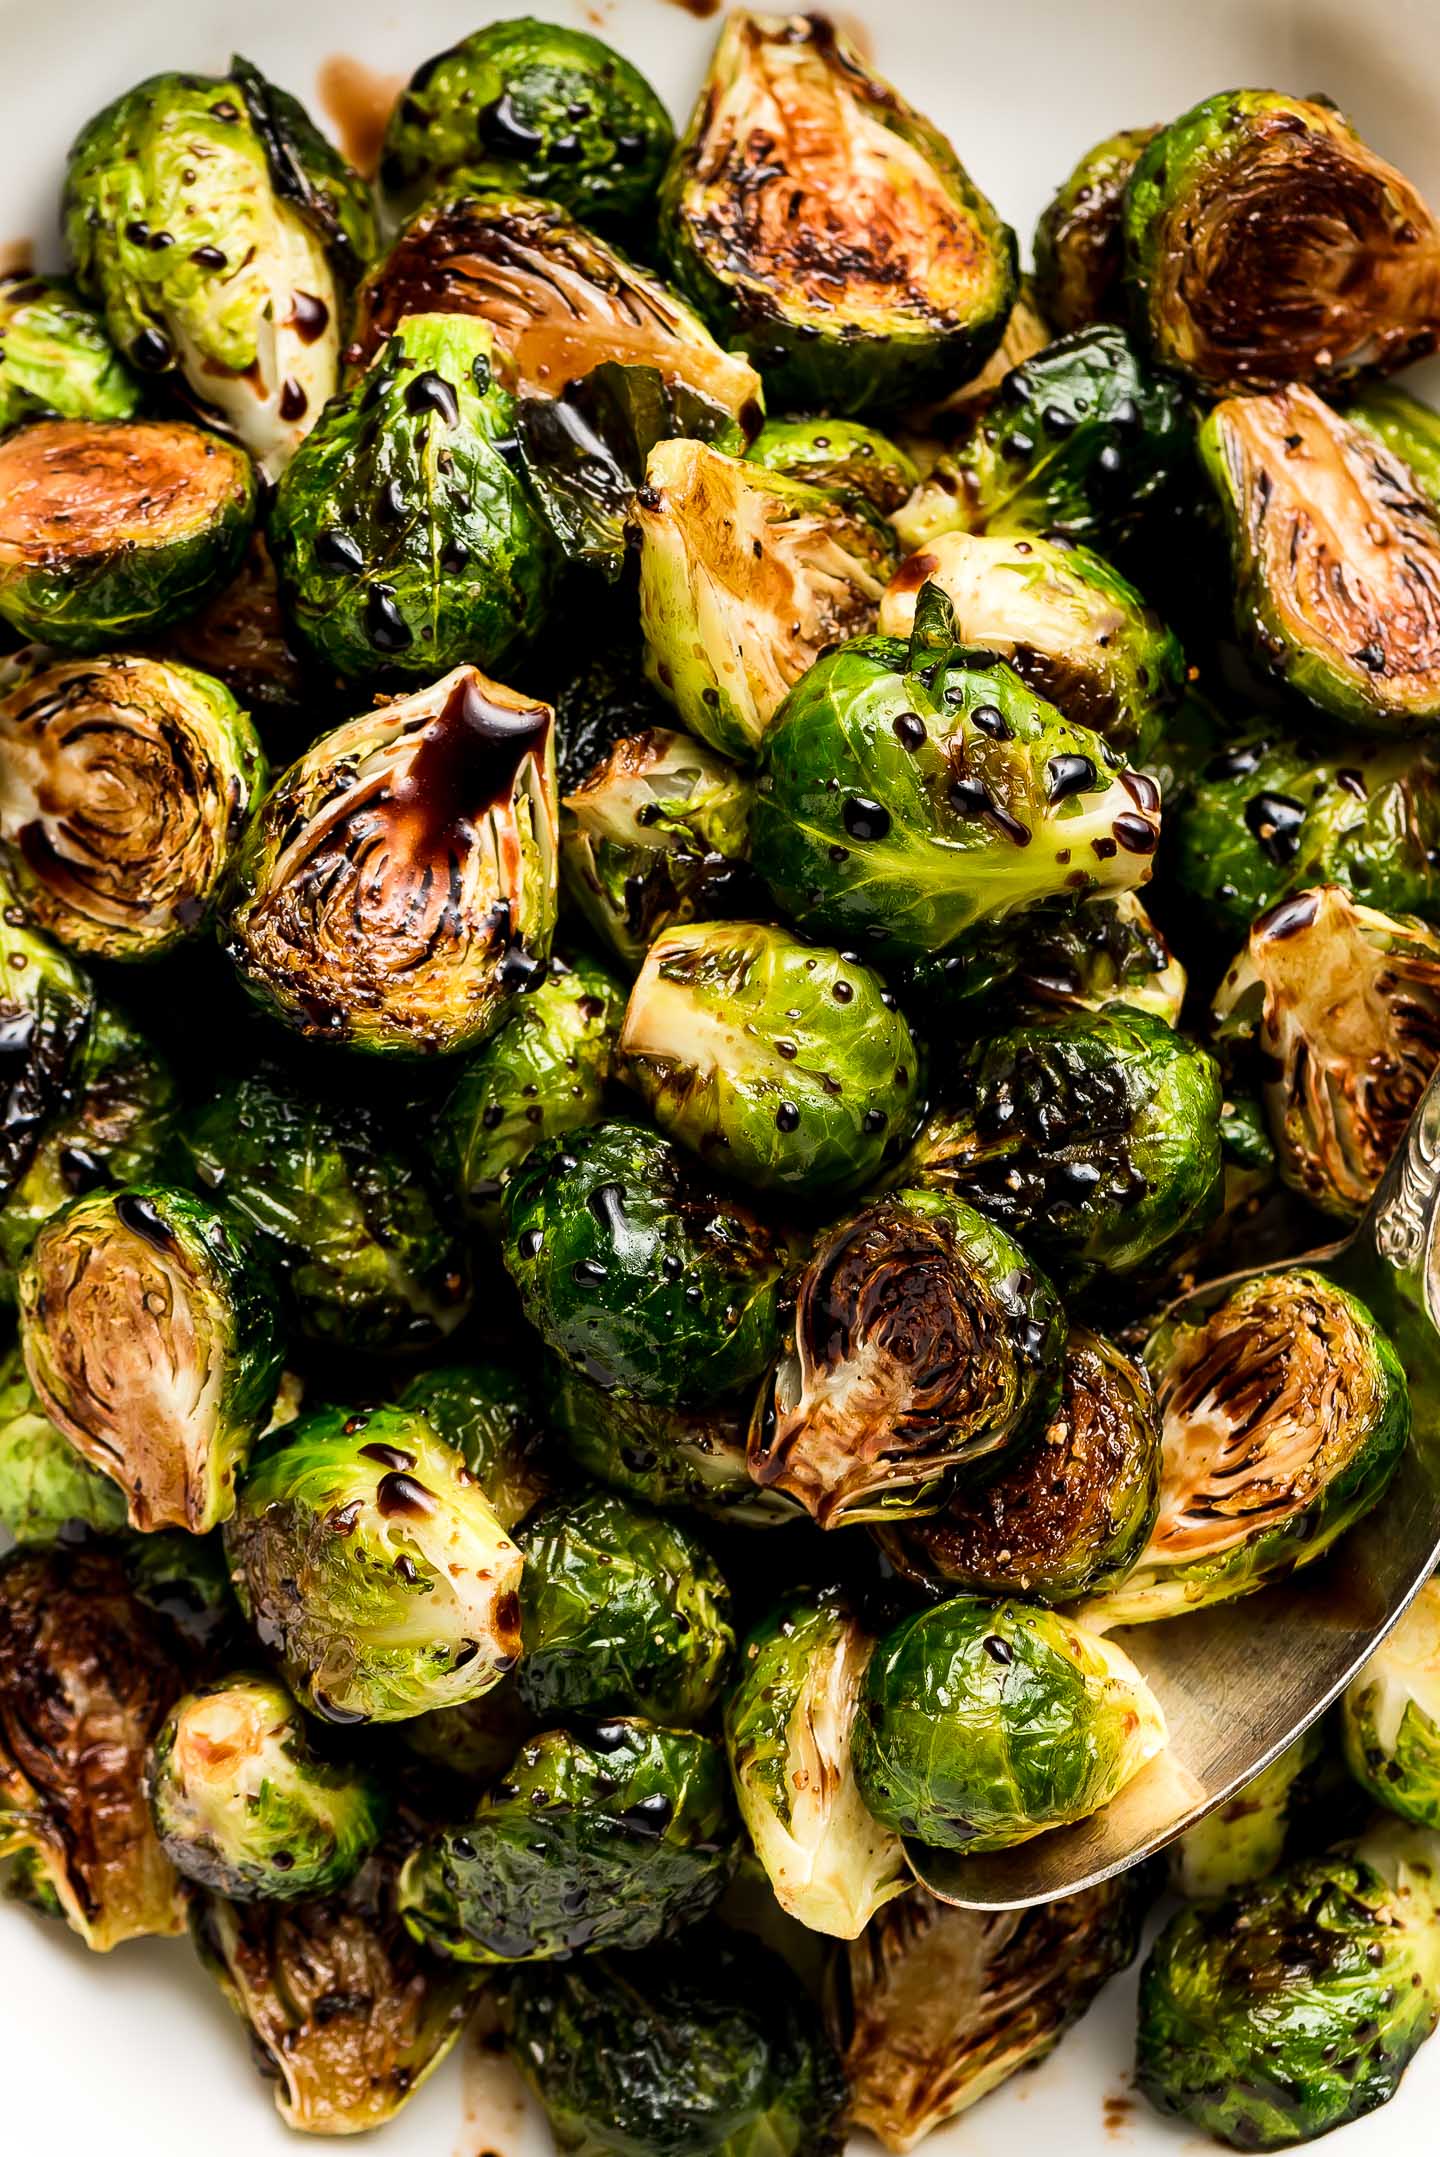 Roasted Brussels Sprouts with Balsamic Glaze - Garnish & Glaze